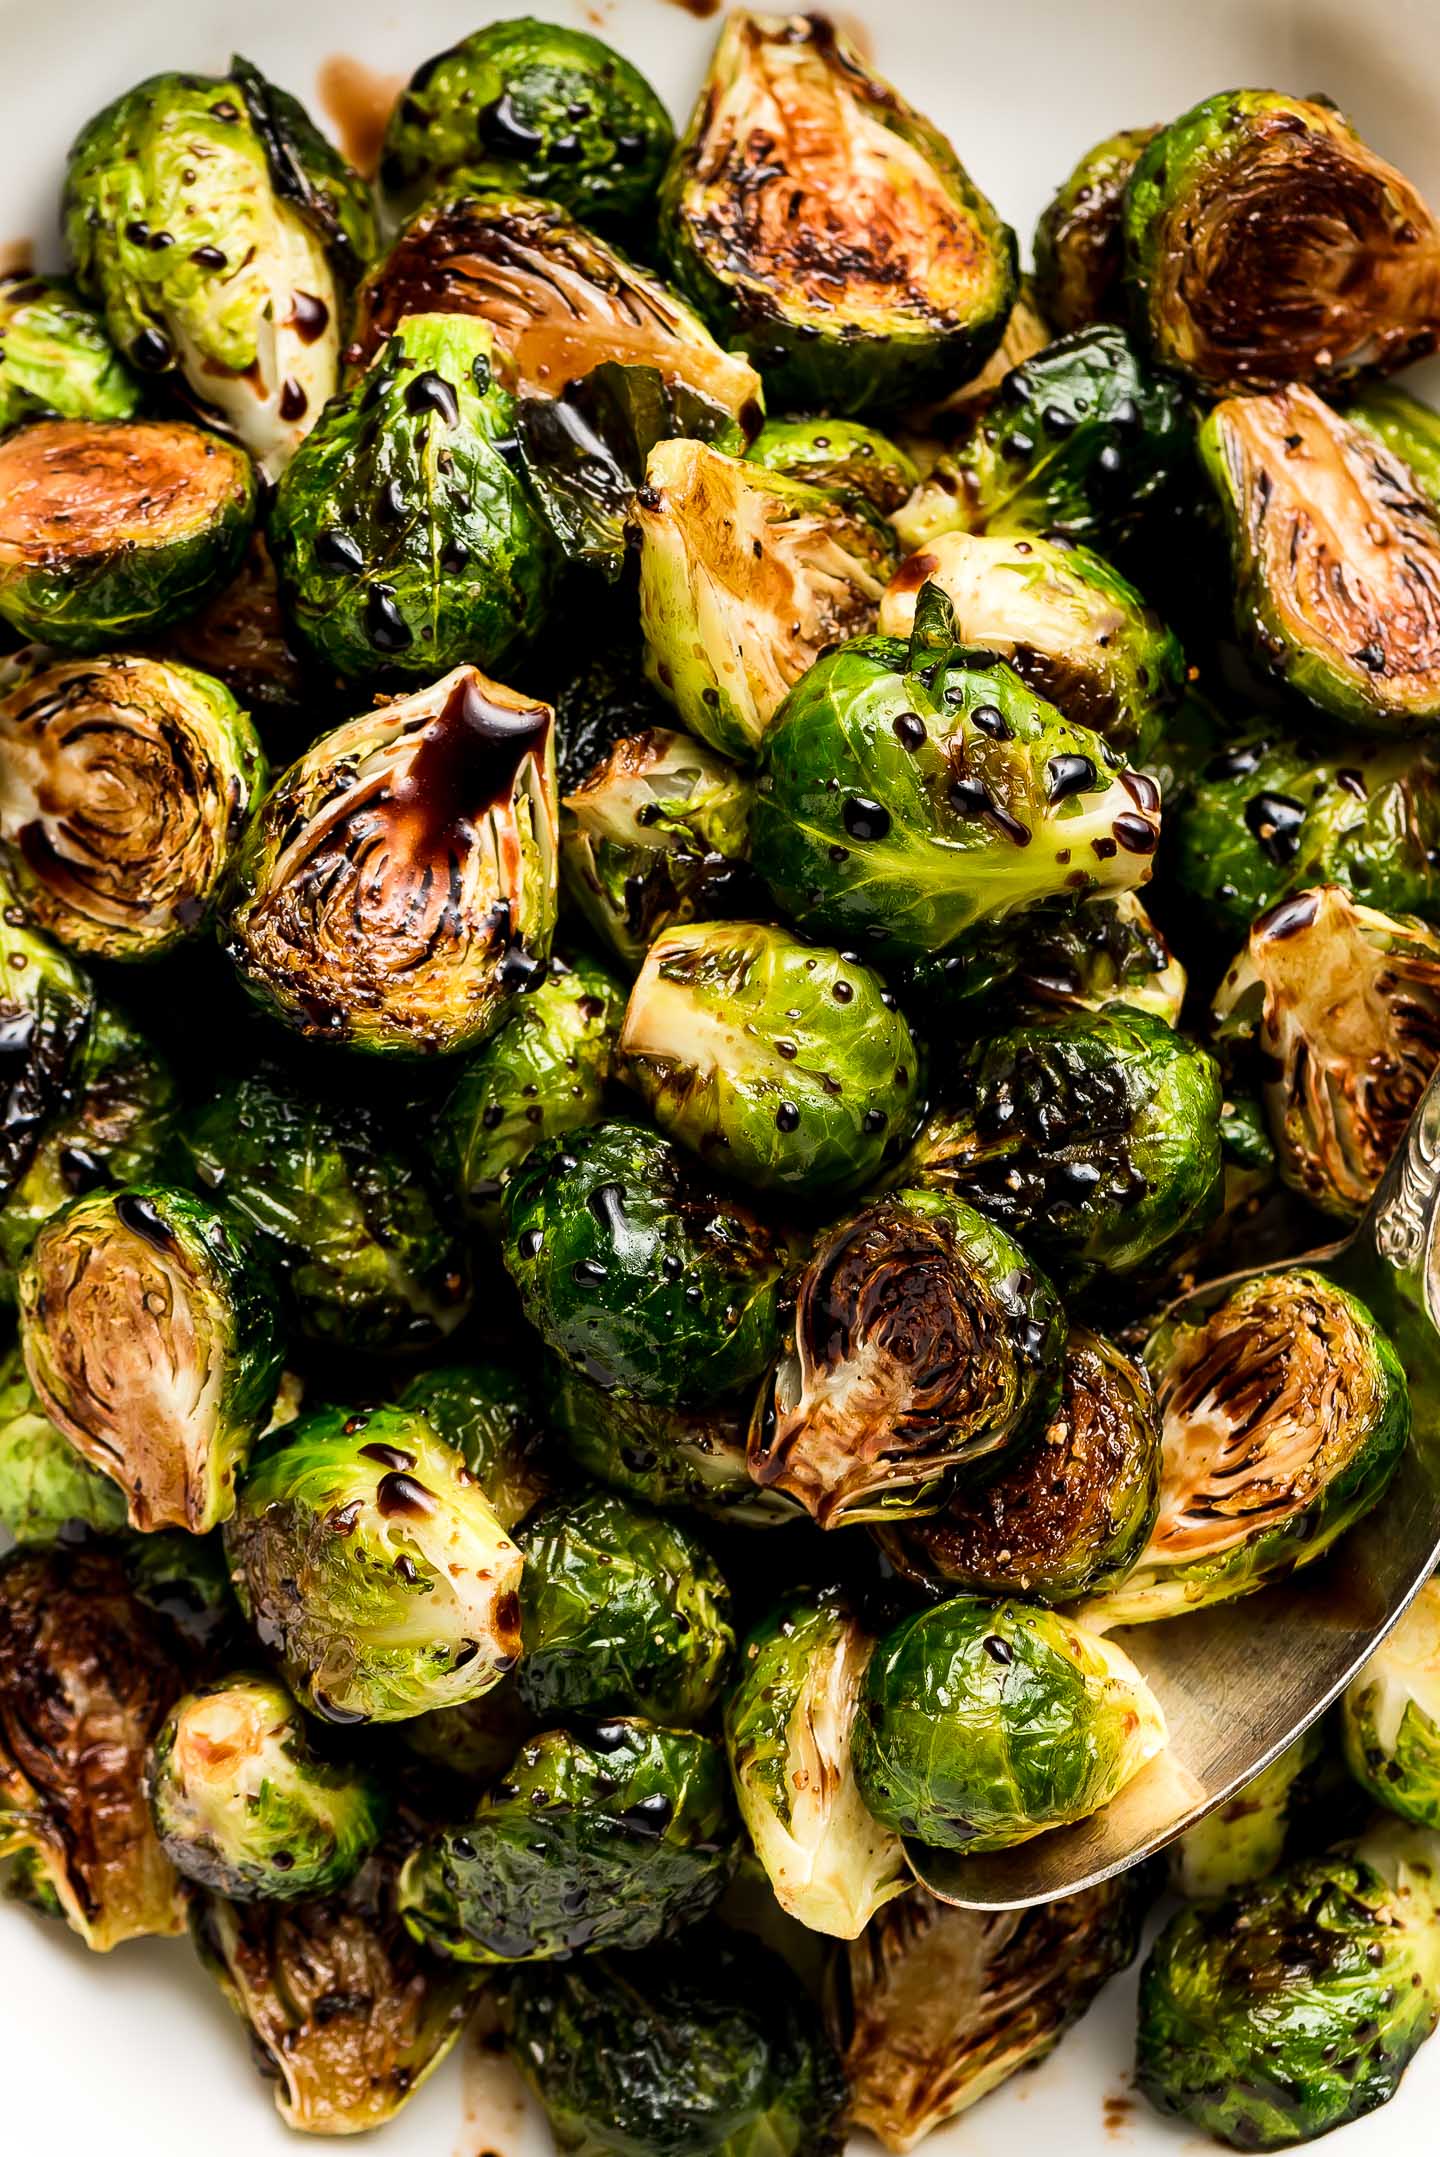 Roasted Brussels Sprouts with Balsamic Glaze - Garnish & Glaze